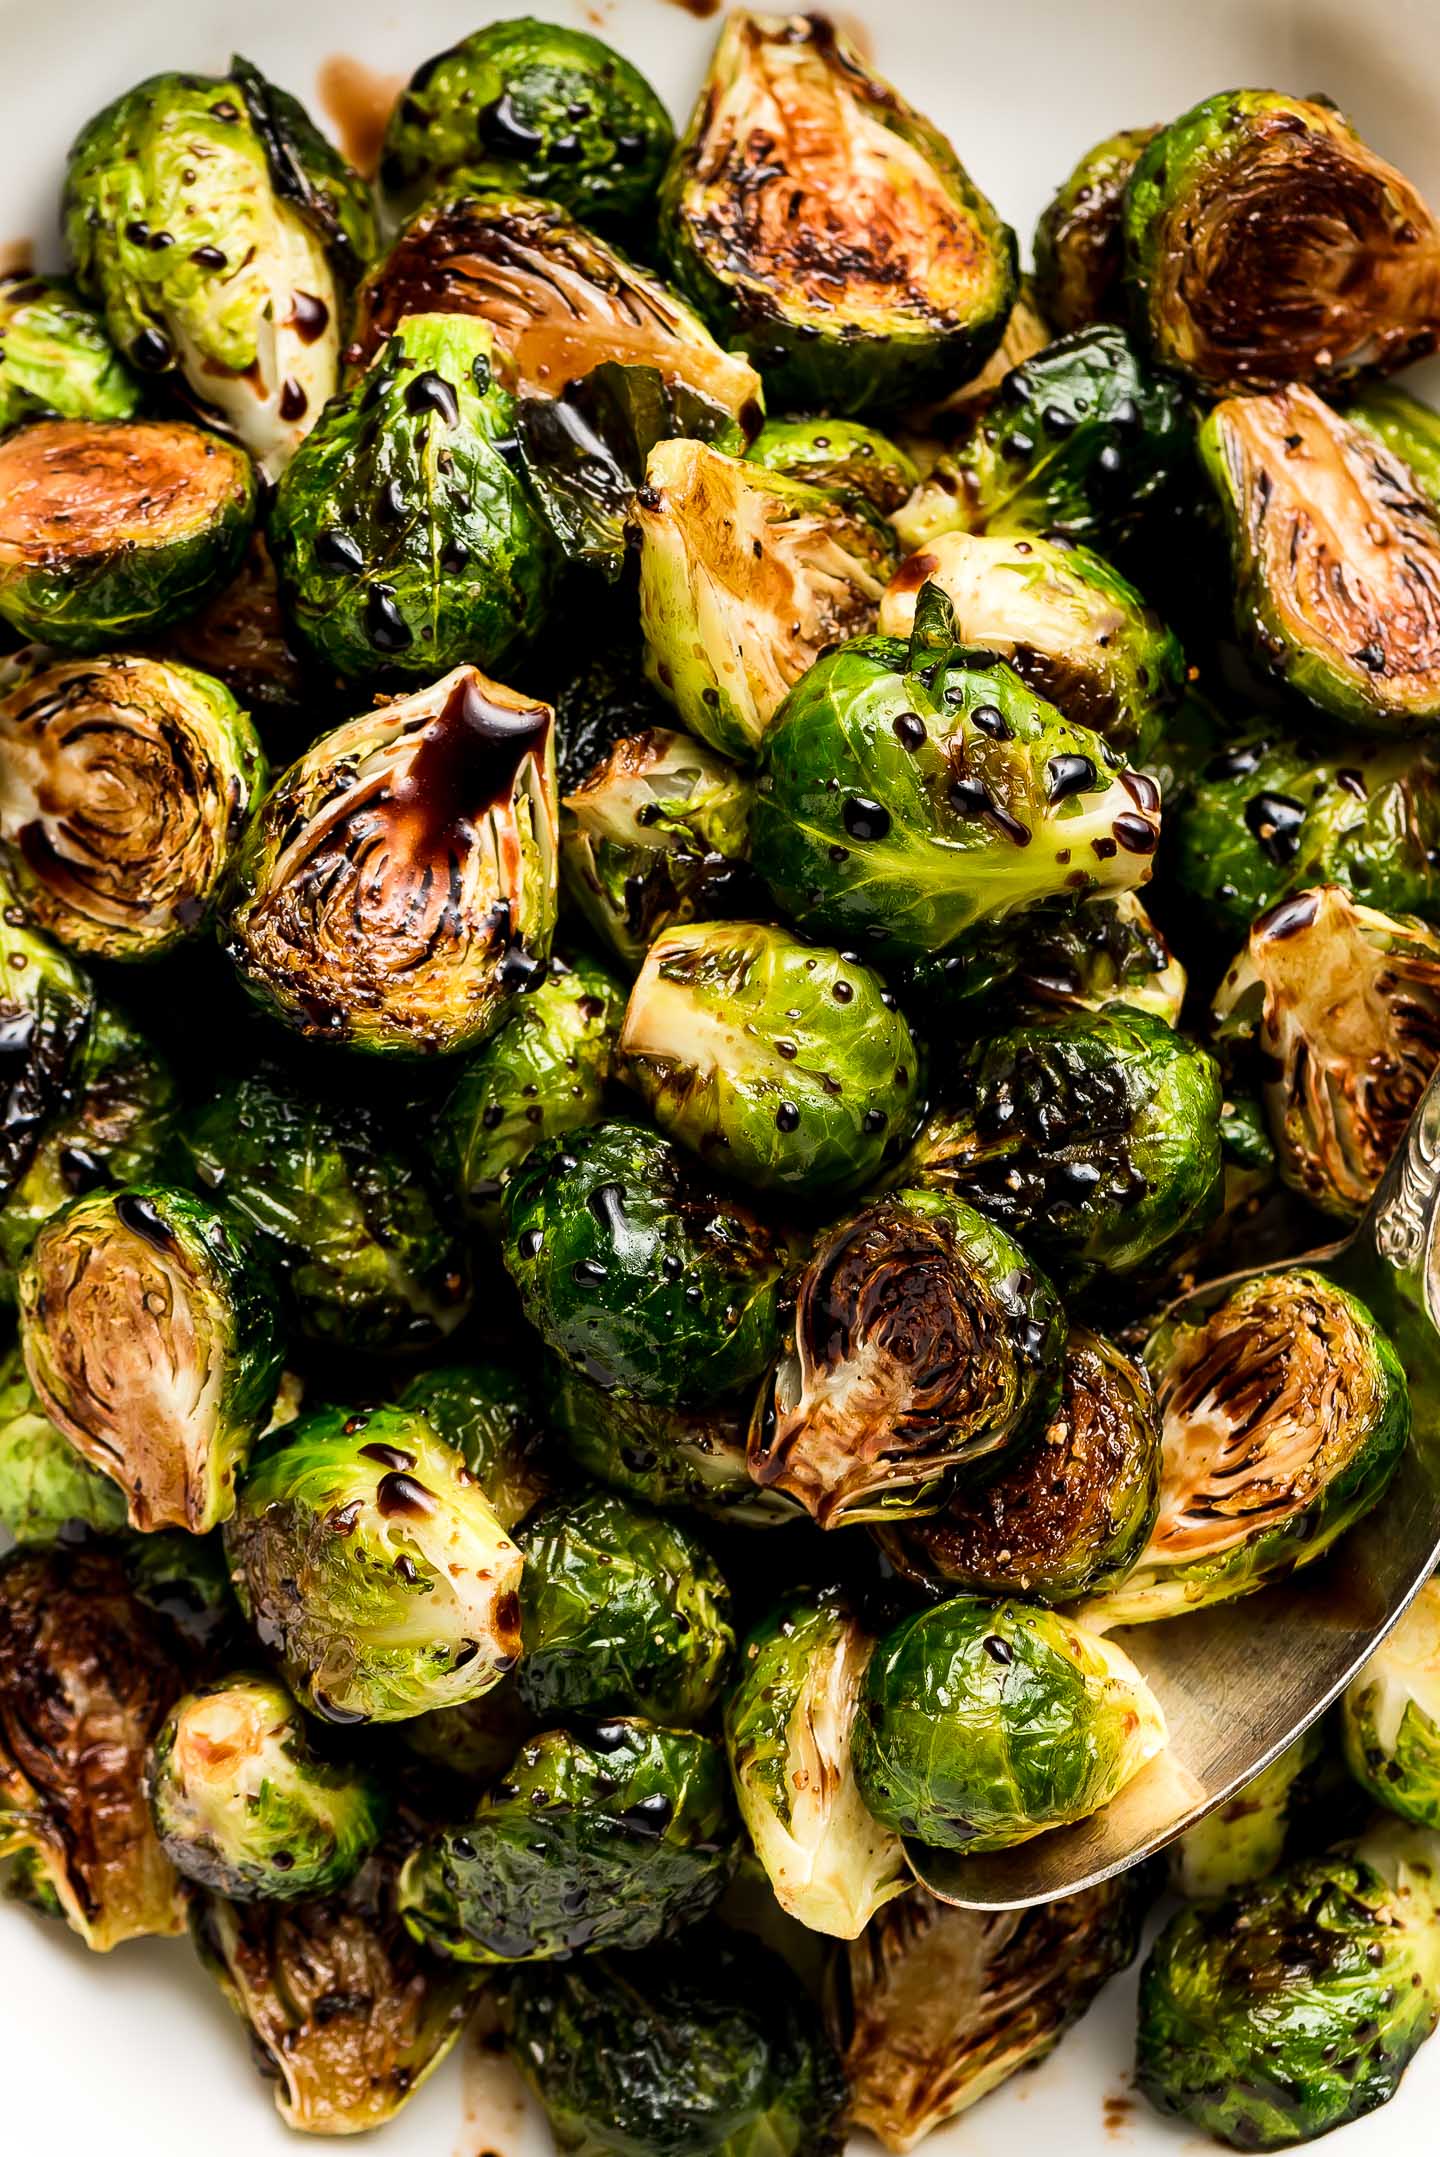 Roasted Brussels Sprouts with Balsamic Glaze - Garnish & Glaze